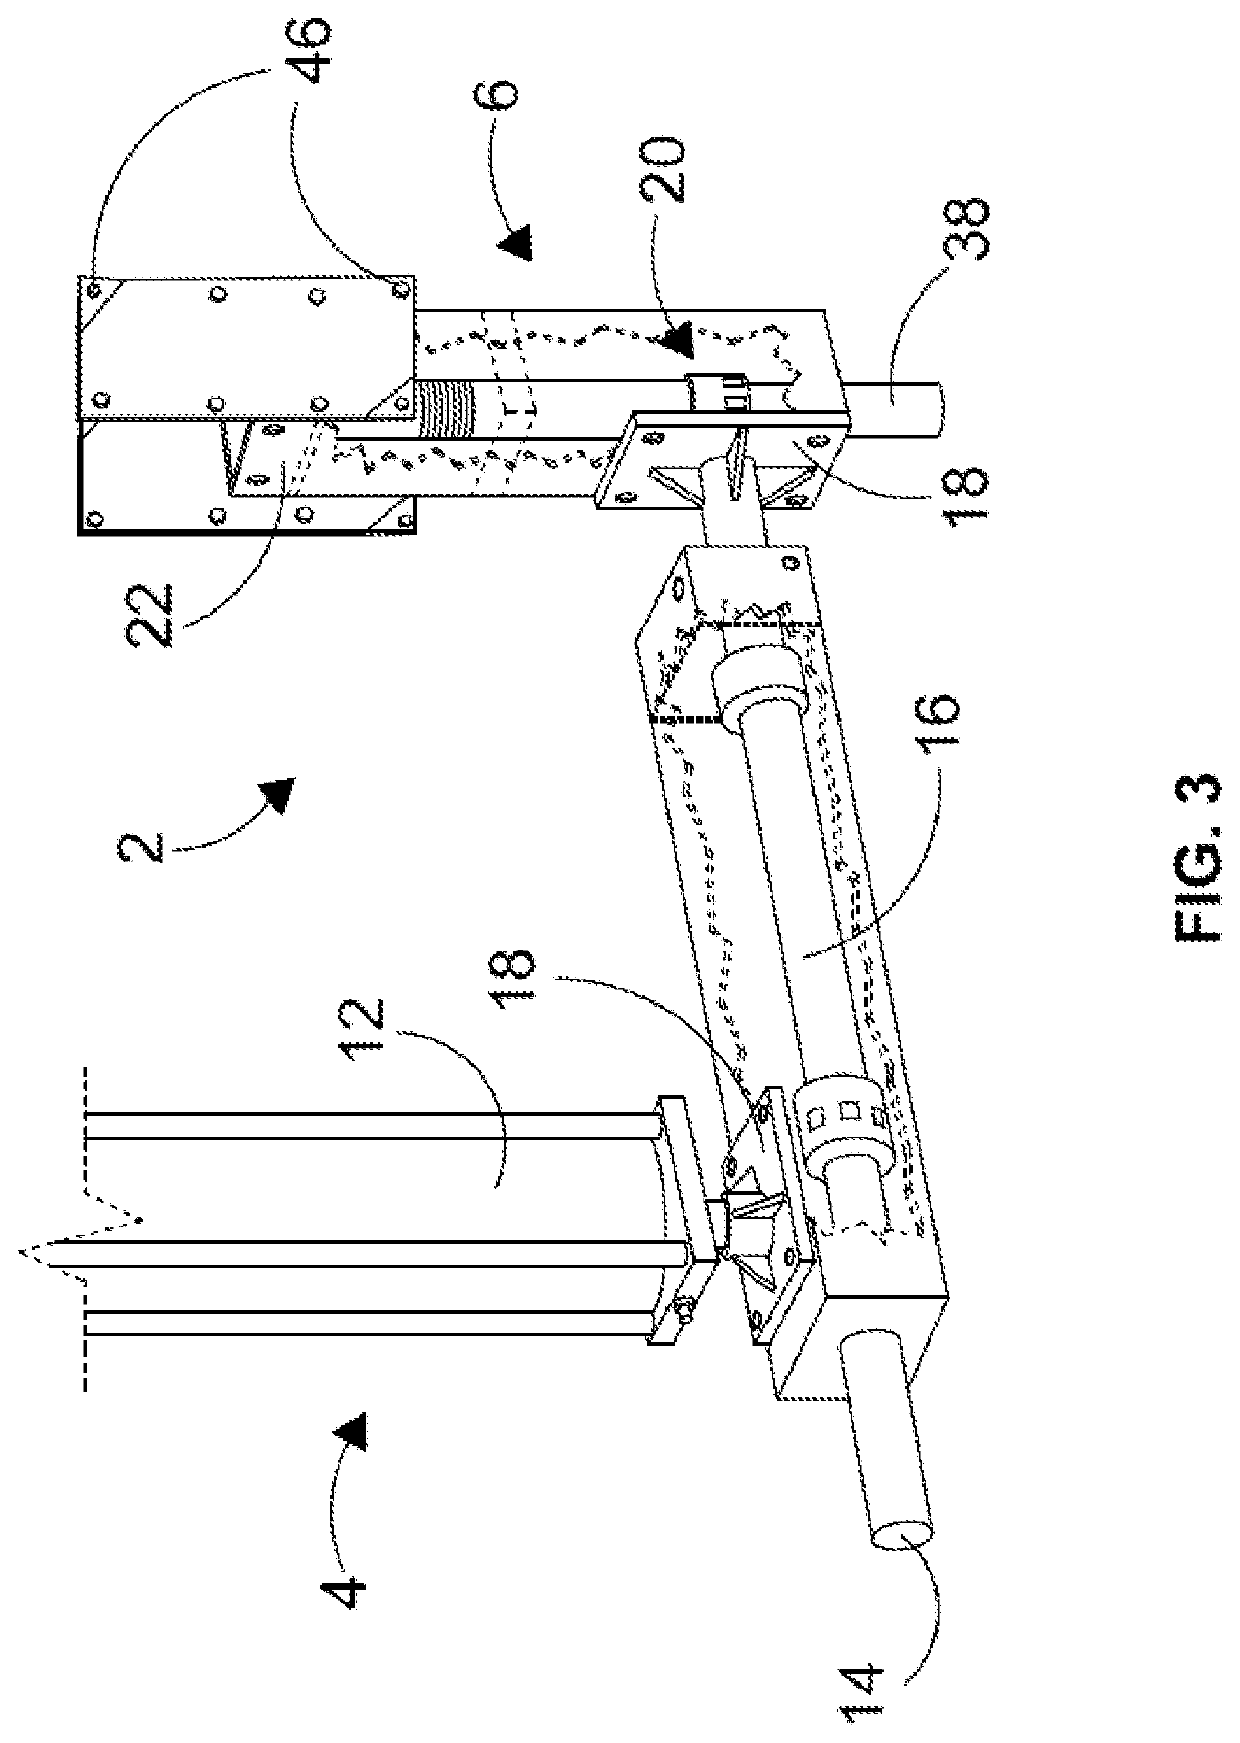 Apparatus for supporting and maneuvering an animal carcass